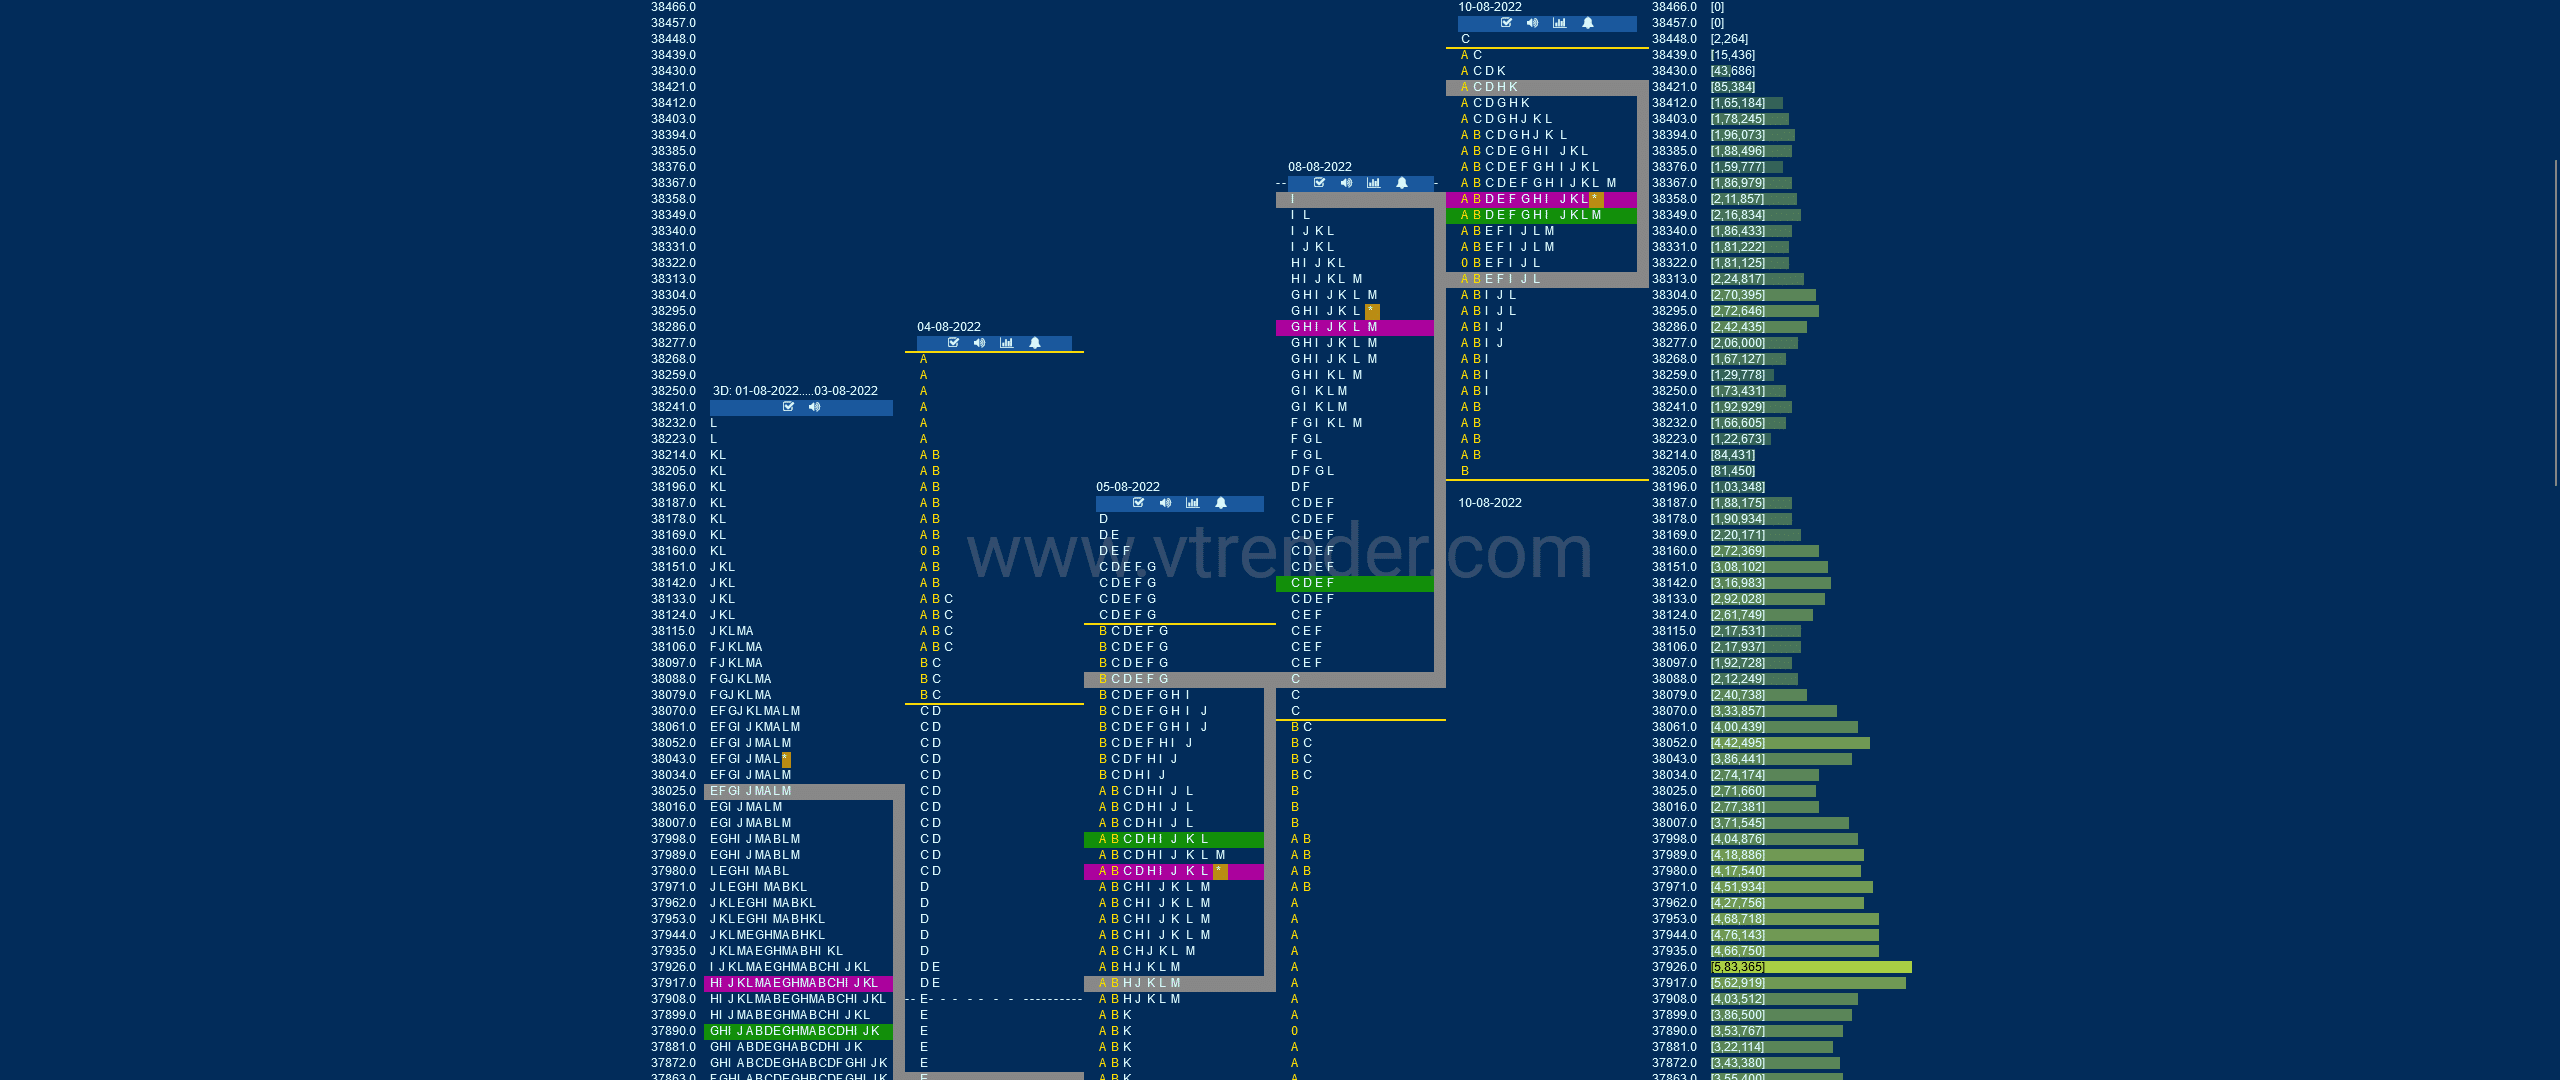 Bnf 7 Market Profile Analysis Dated 10Th Aug 2022 Banknifty Futures, Charts, Day Trading, Intraday Trading, Intraday Trading Strategies, Market Profile, Market Profile Trading Strategies, Nifty Futures, Order Flow Analysis, Support And Resistance, Technical Analysis, Trading Strategies, Volume Profile Trading